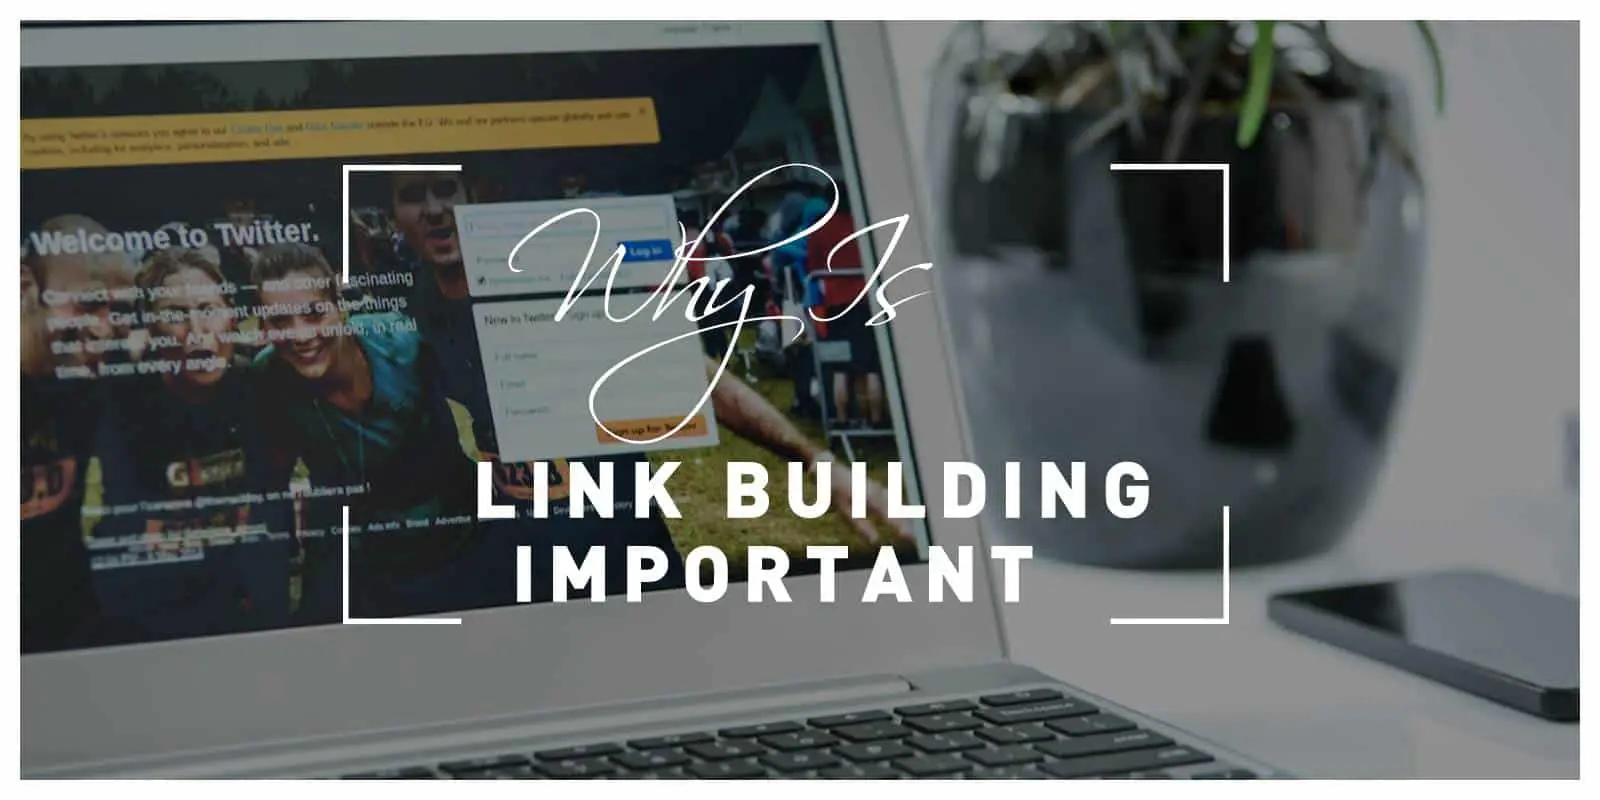 Why Is Link Building Important